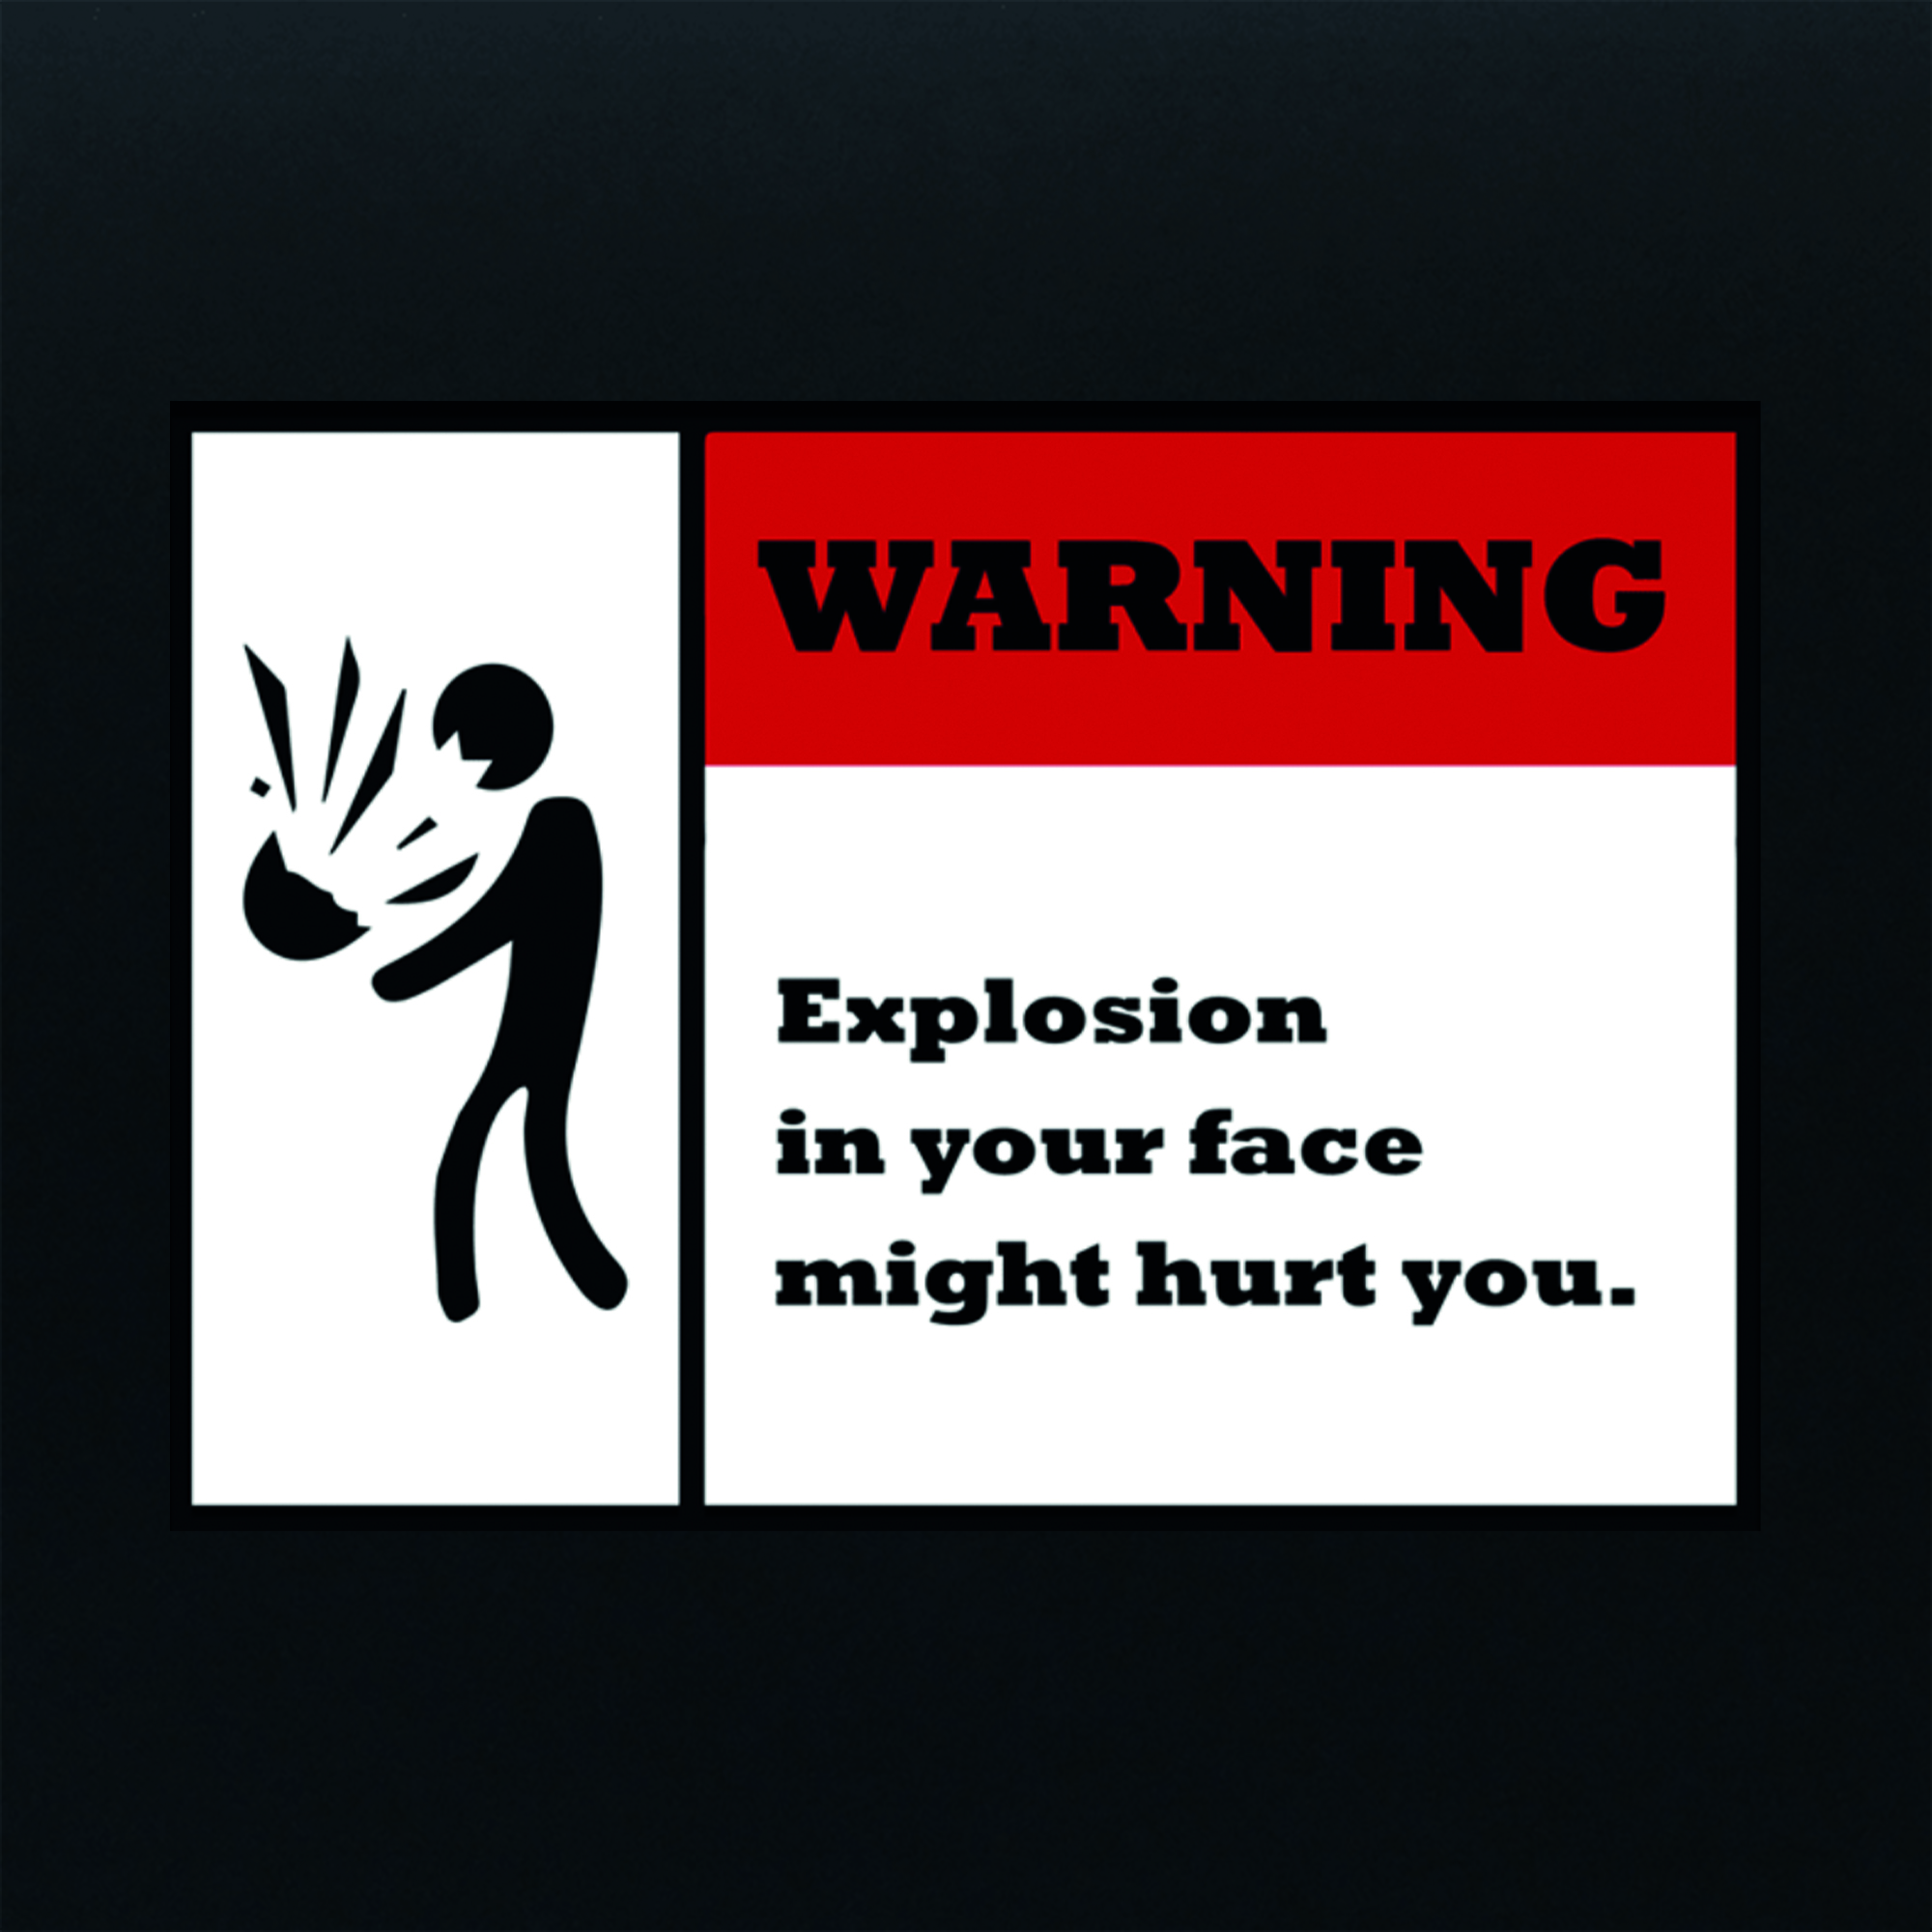 Warning! Explosion in your face might hurt you - Vinyl Sticker